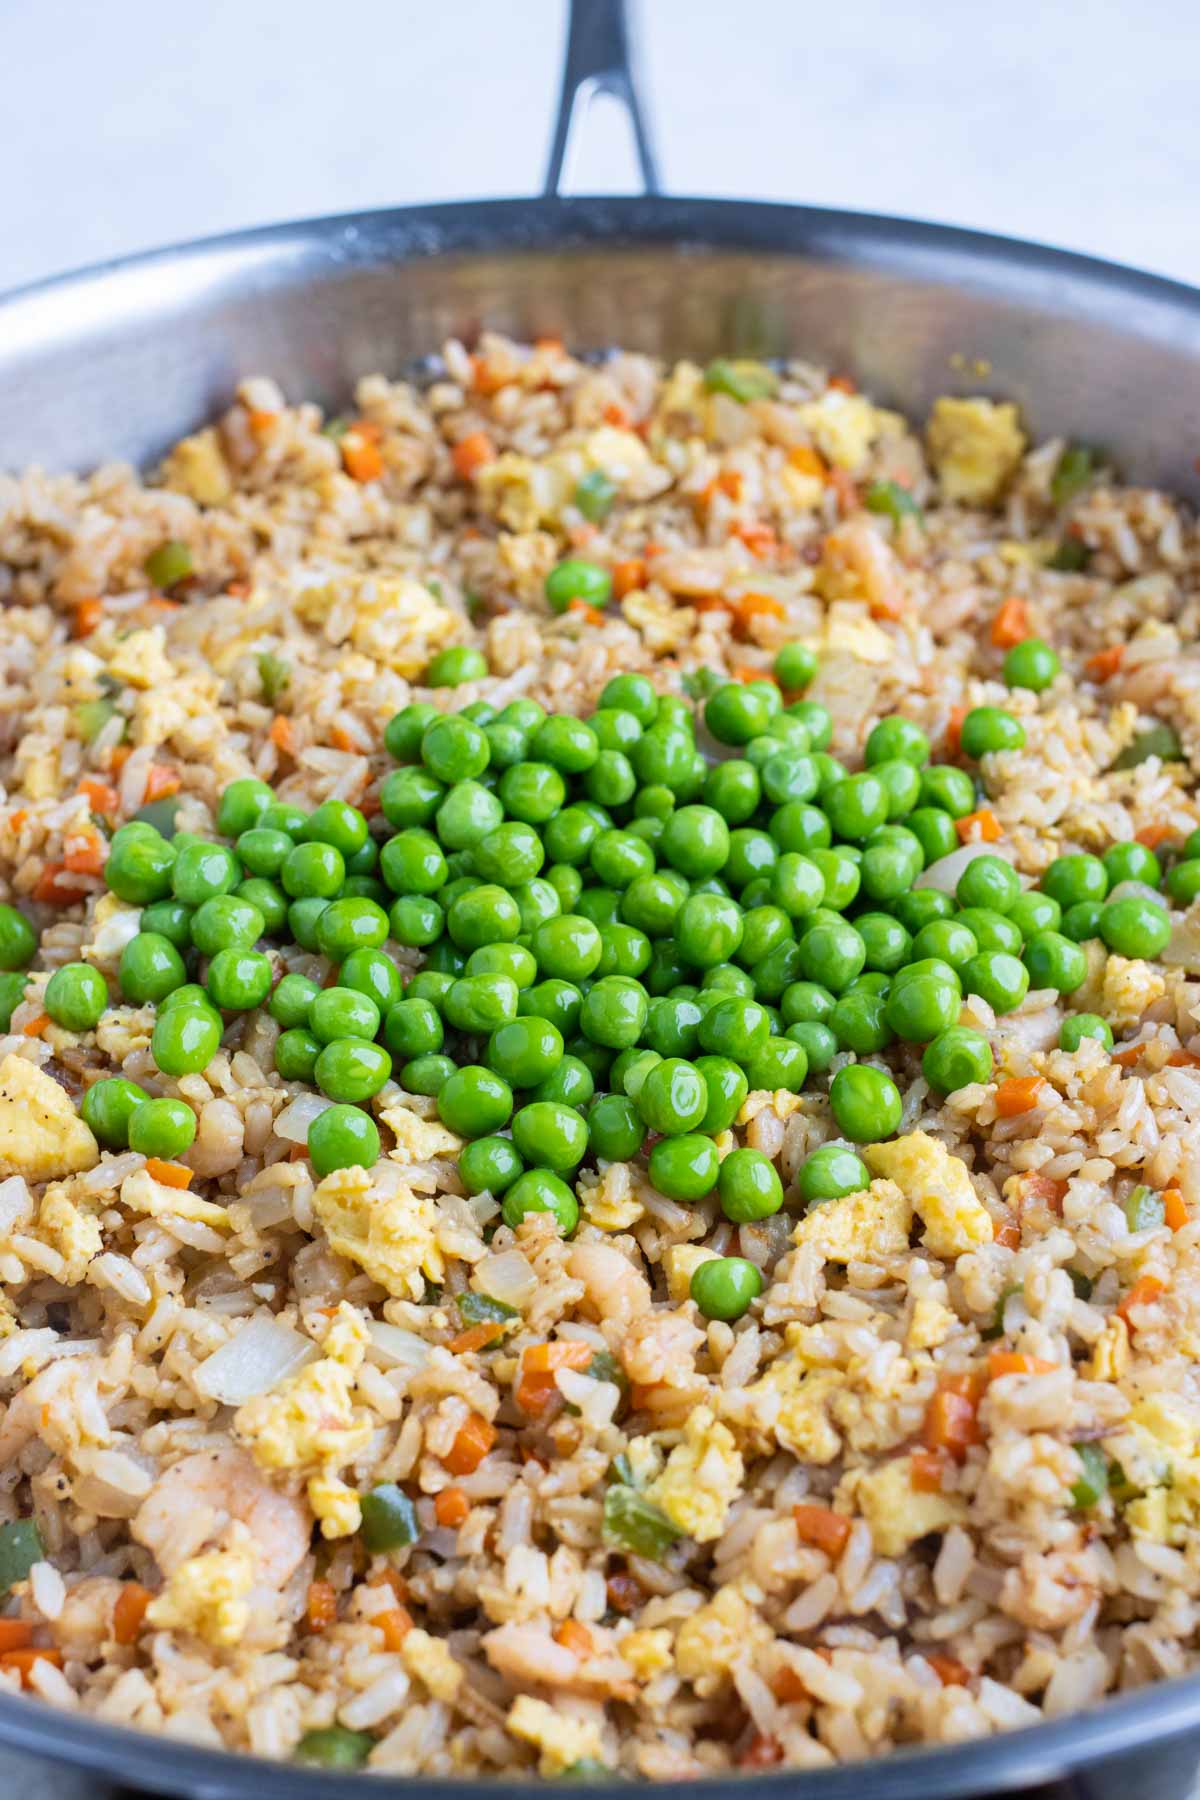 Peas are added lastly to the fried rice.